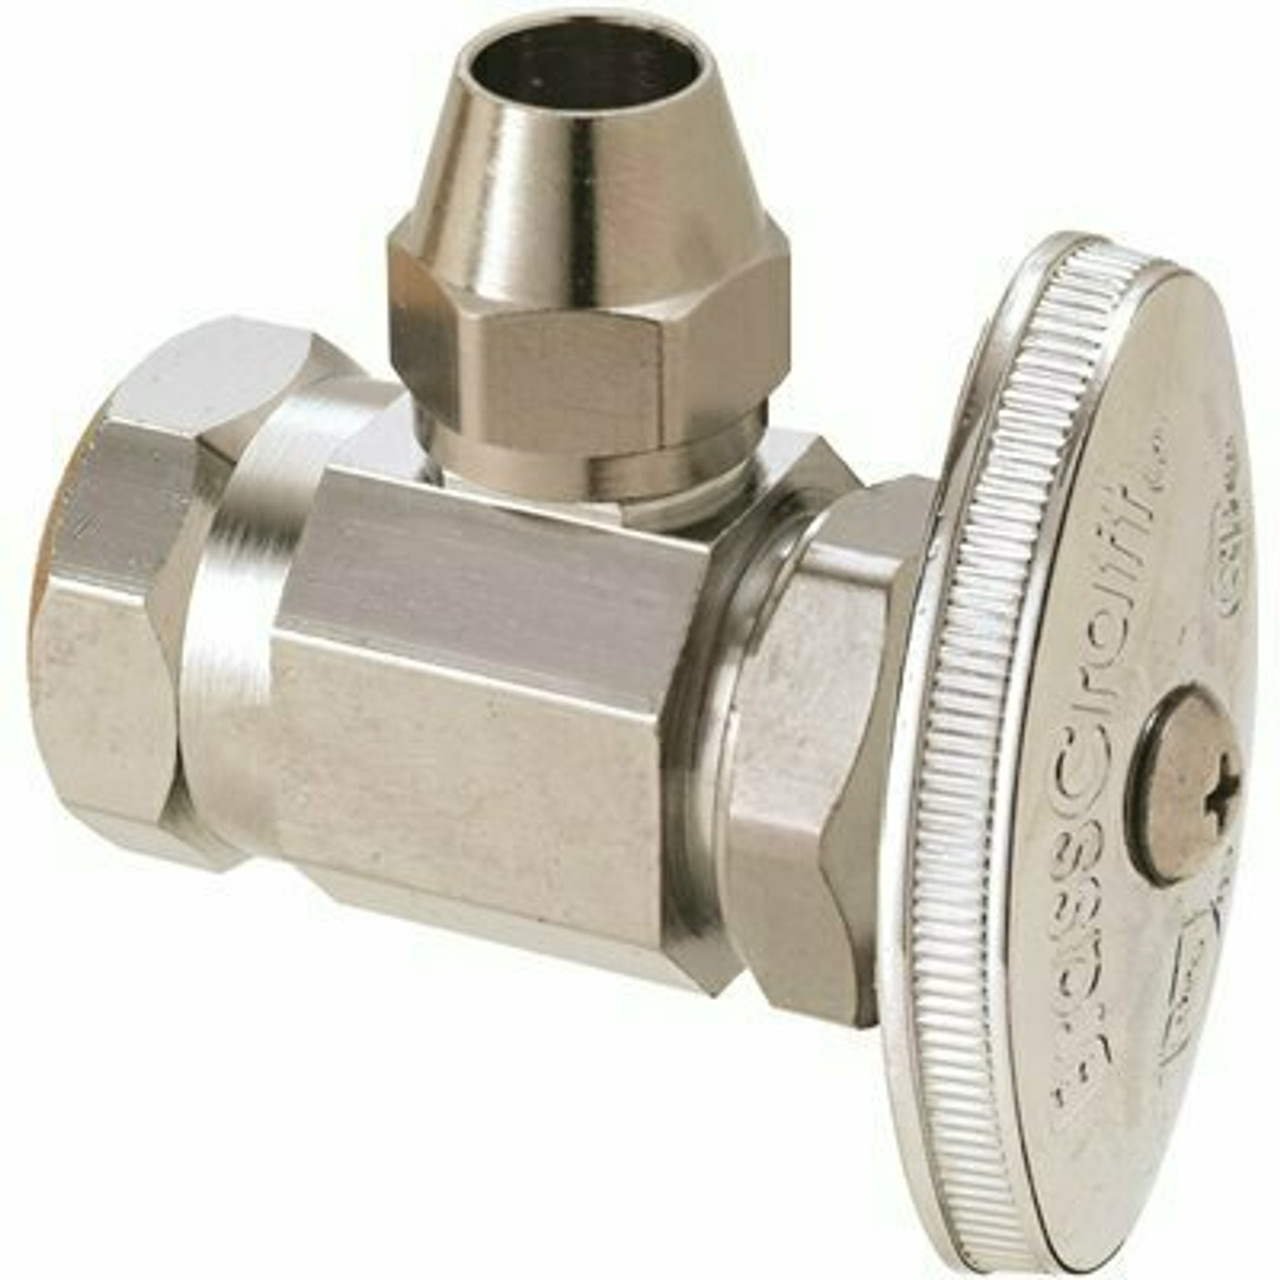 Brasscraft 1/2 In. Fip Inlet X 3/8 In. O.D. Flare Outlet Multi-Turn Angle Stop